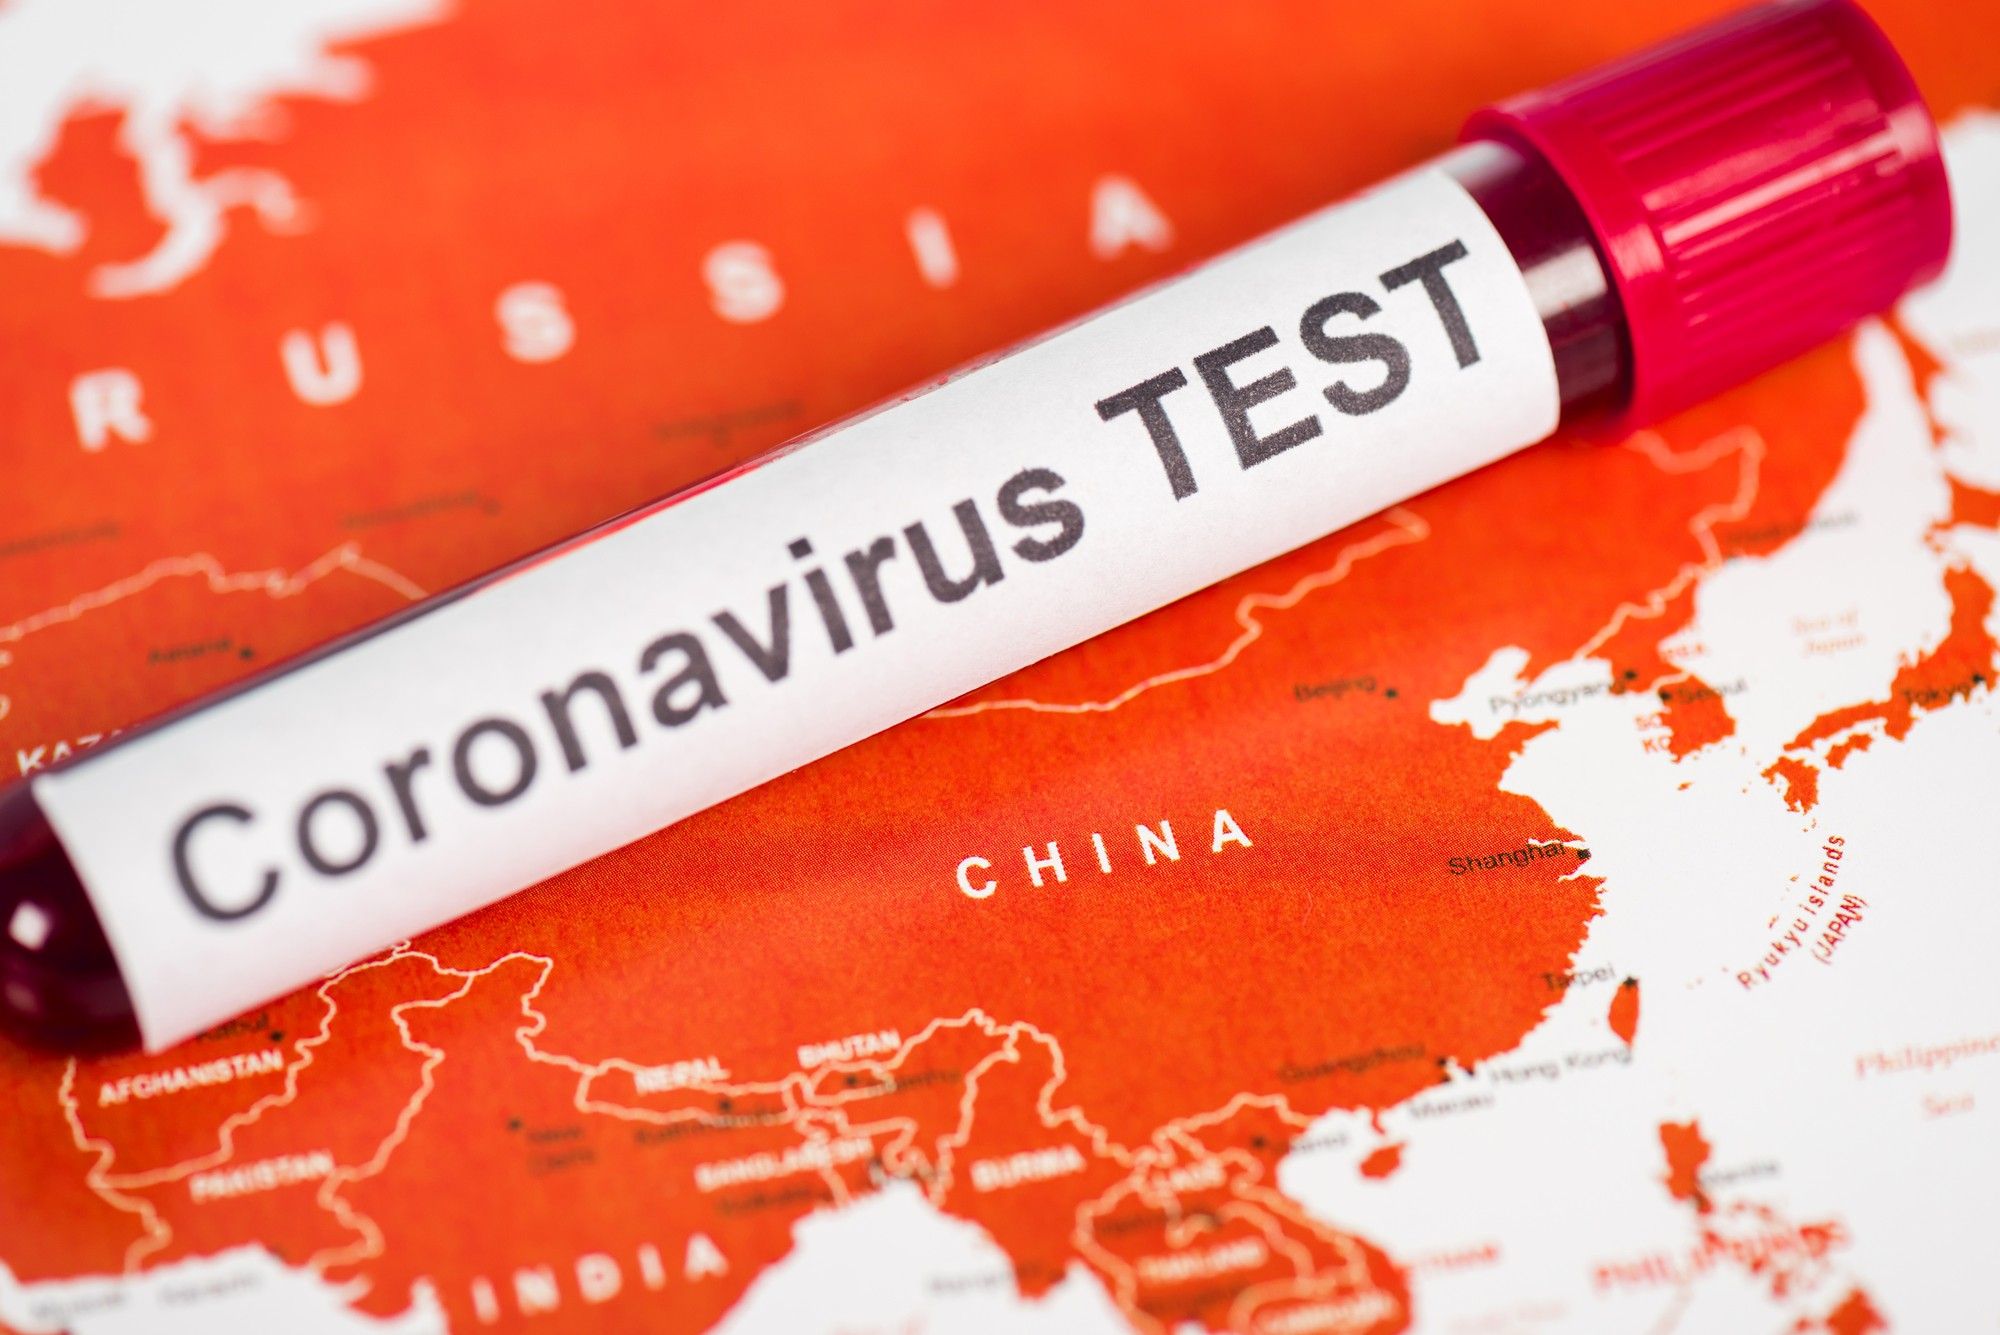 China has been accused of covering up the impact of coronavirus